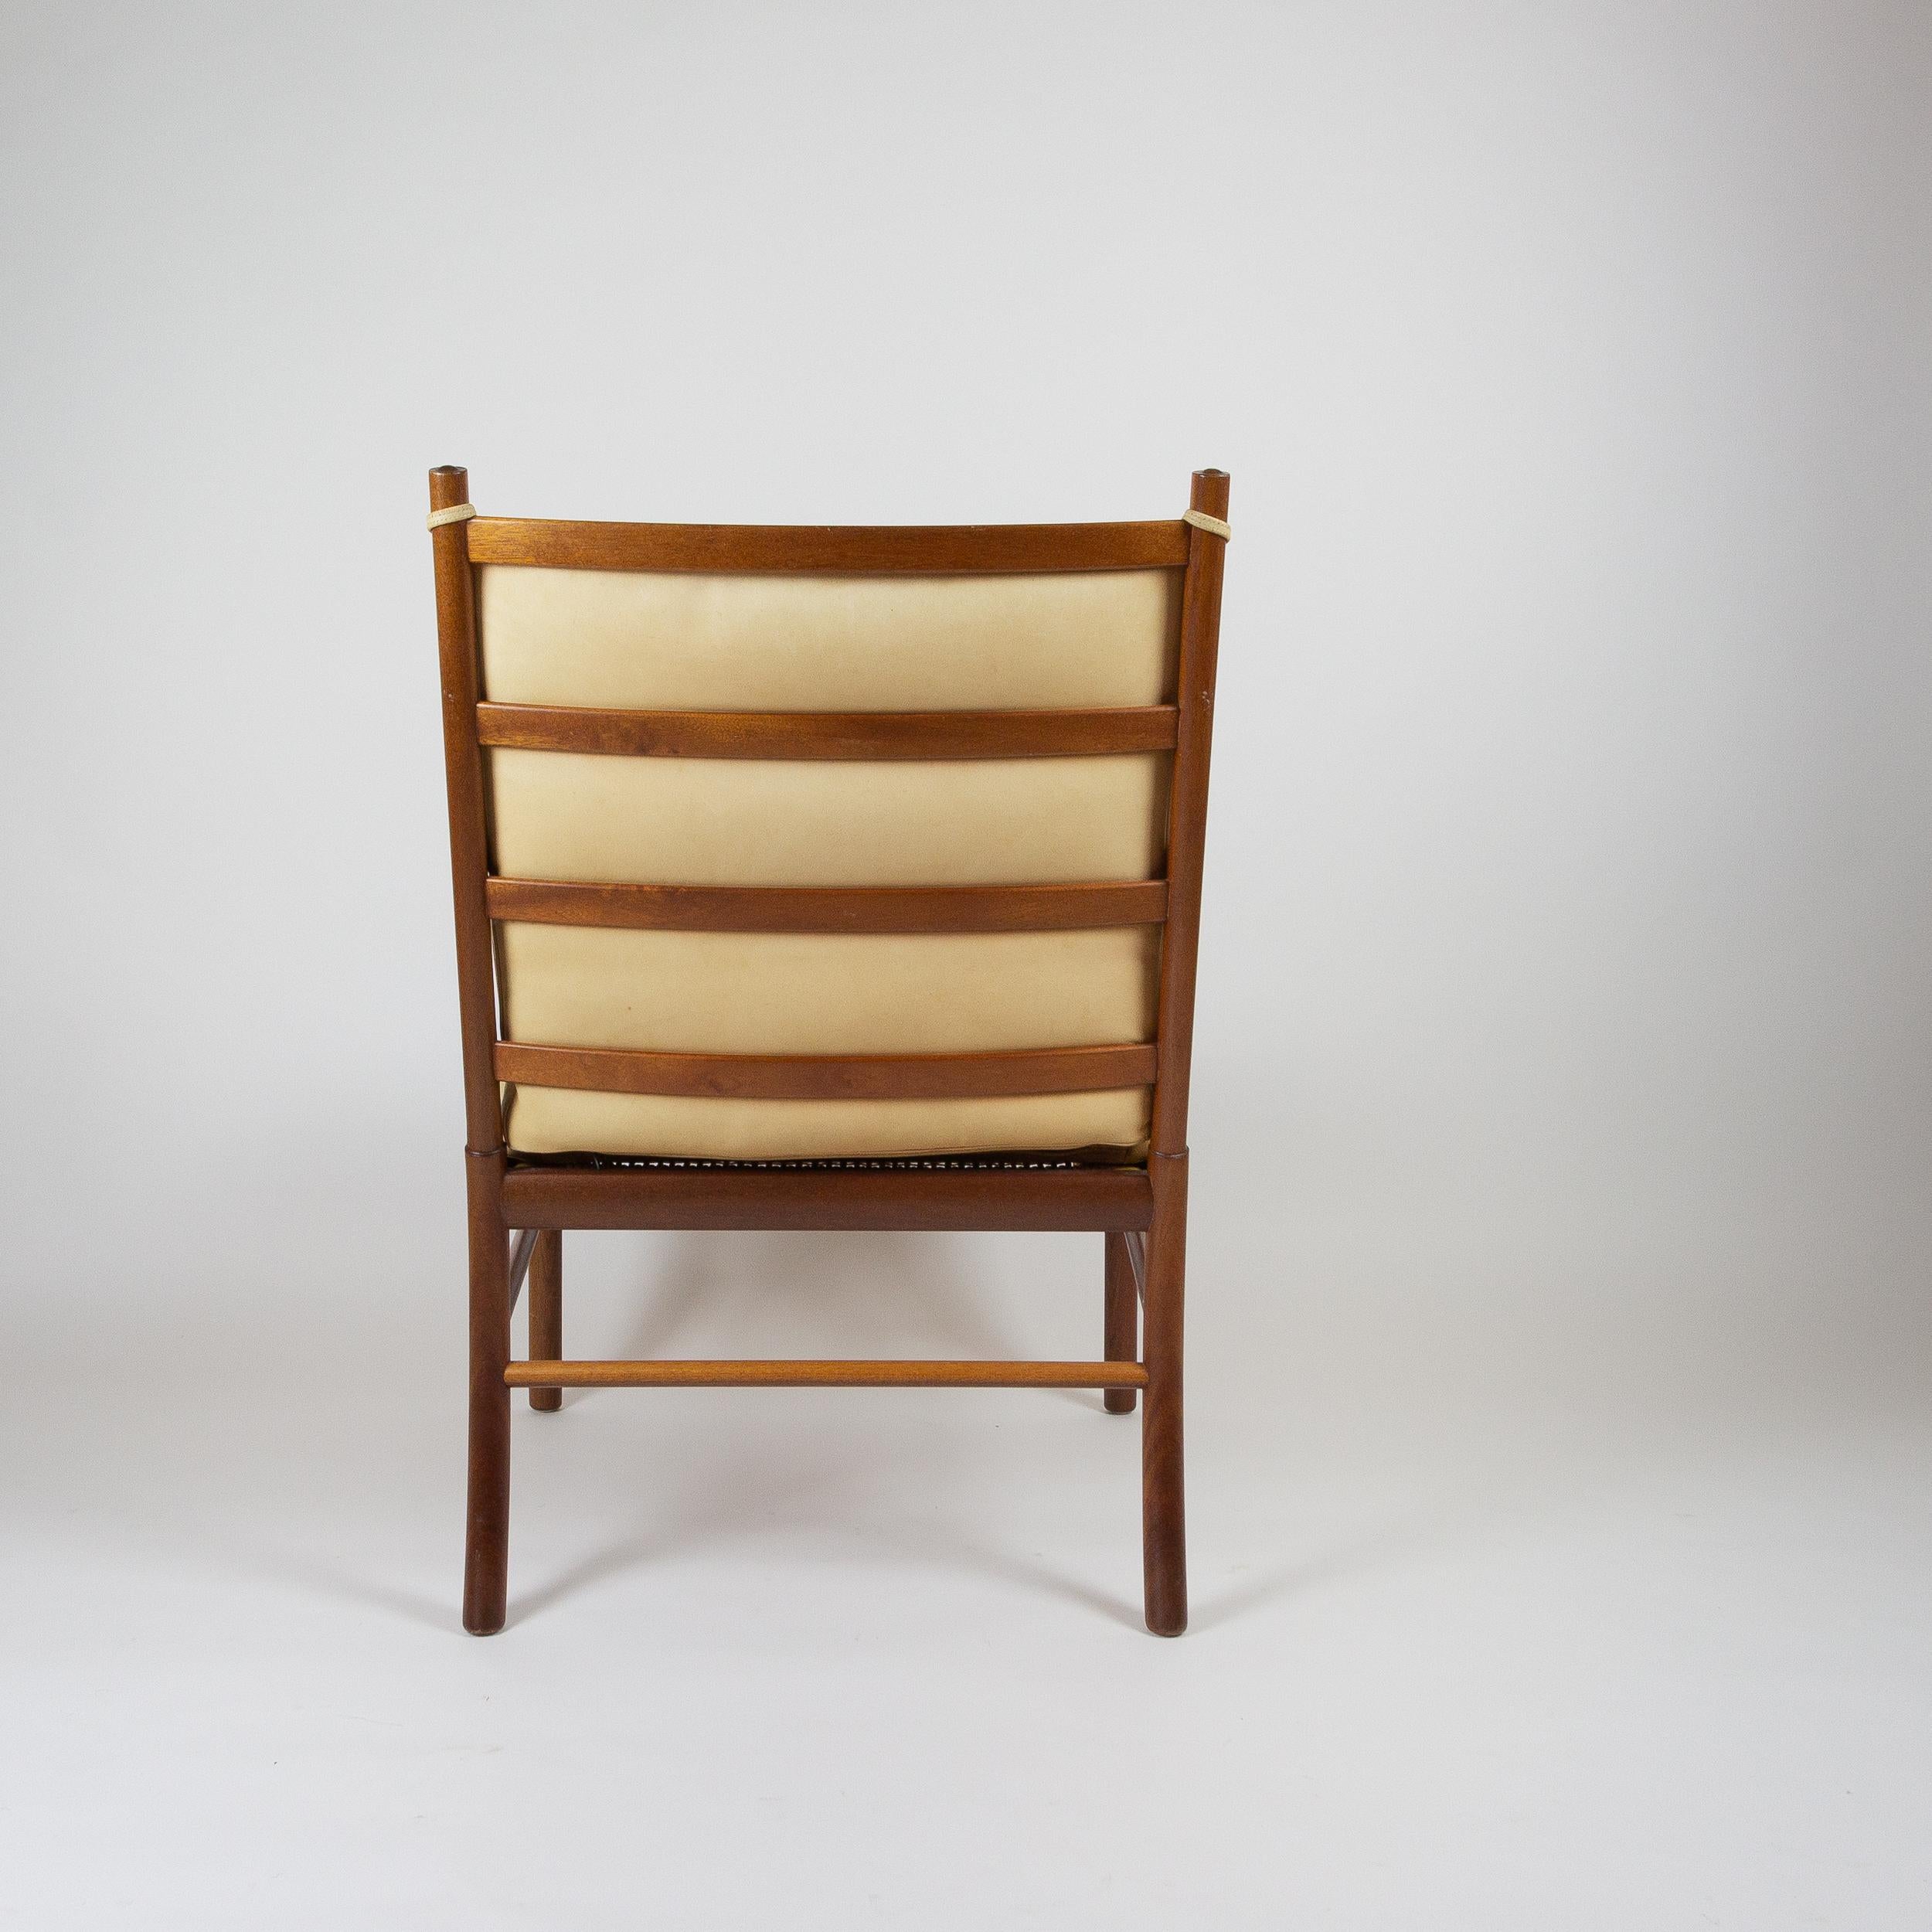 An Ole Wanscher Colonial armchair in a rare combination of mahogany and original tan leather. Designed in 1949 and produced by Poul Jeppesen. This chair is in excellent vintage condition and has clearly seen little use over the years. The leather is